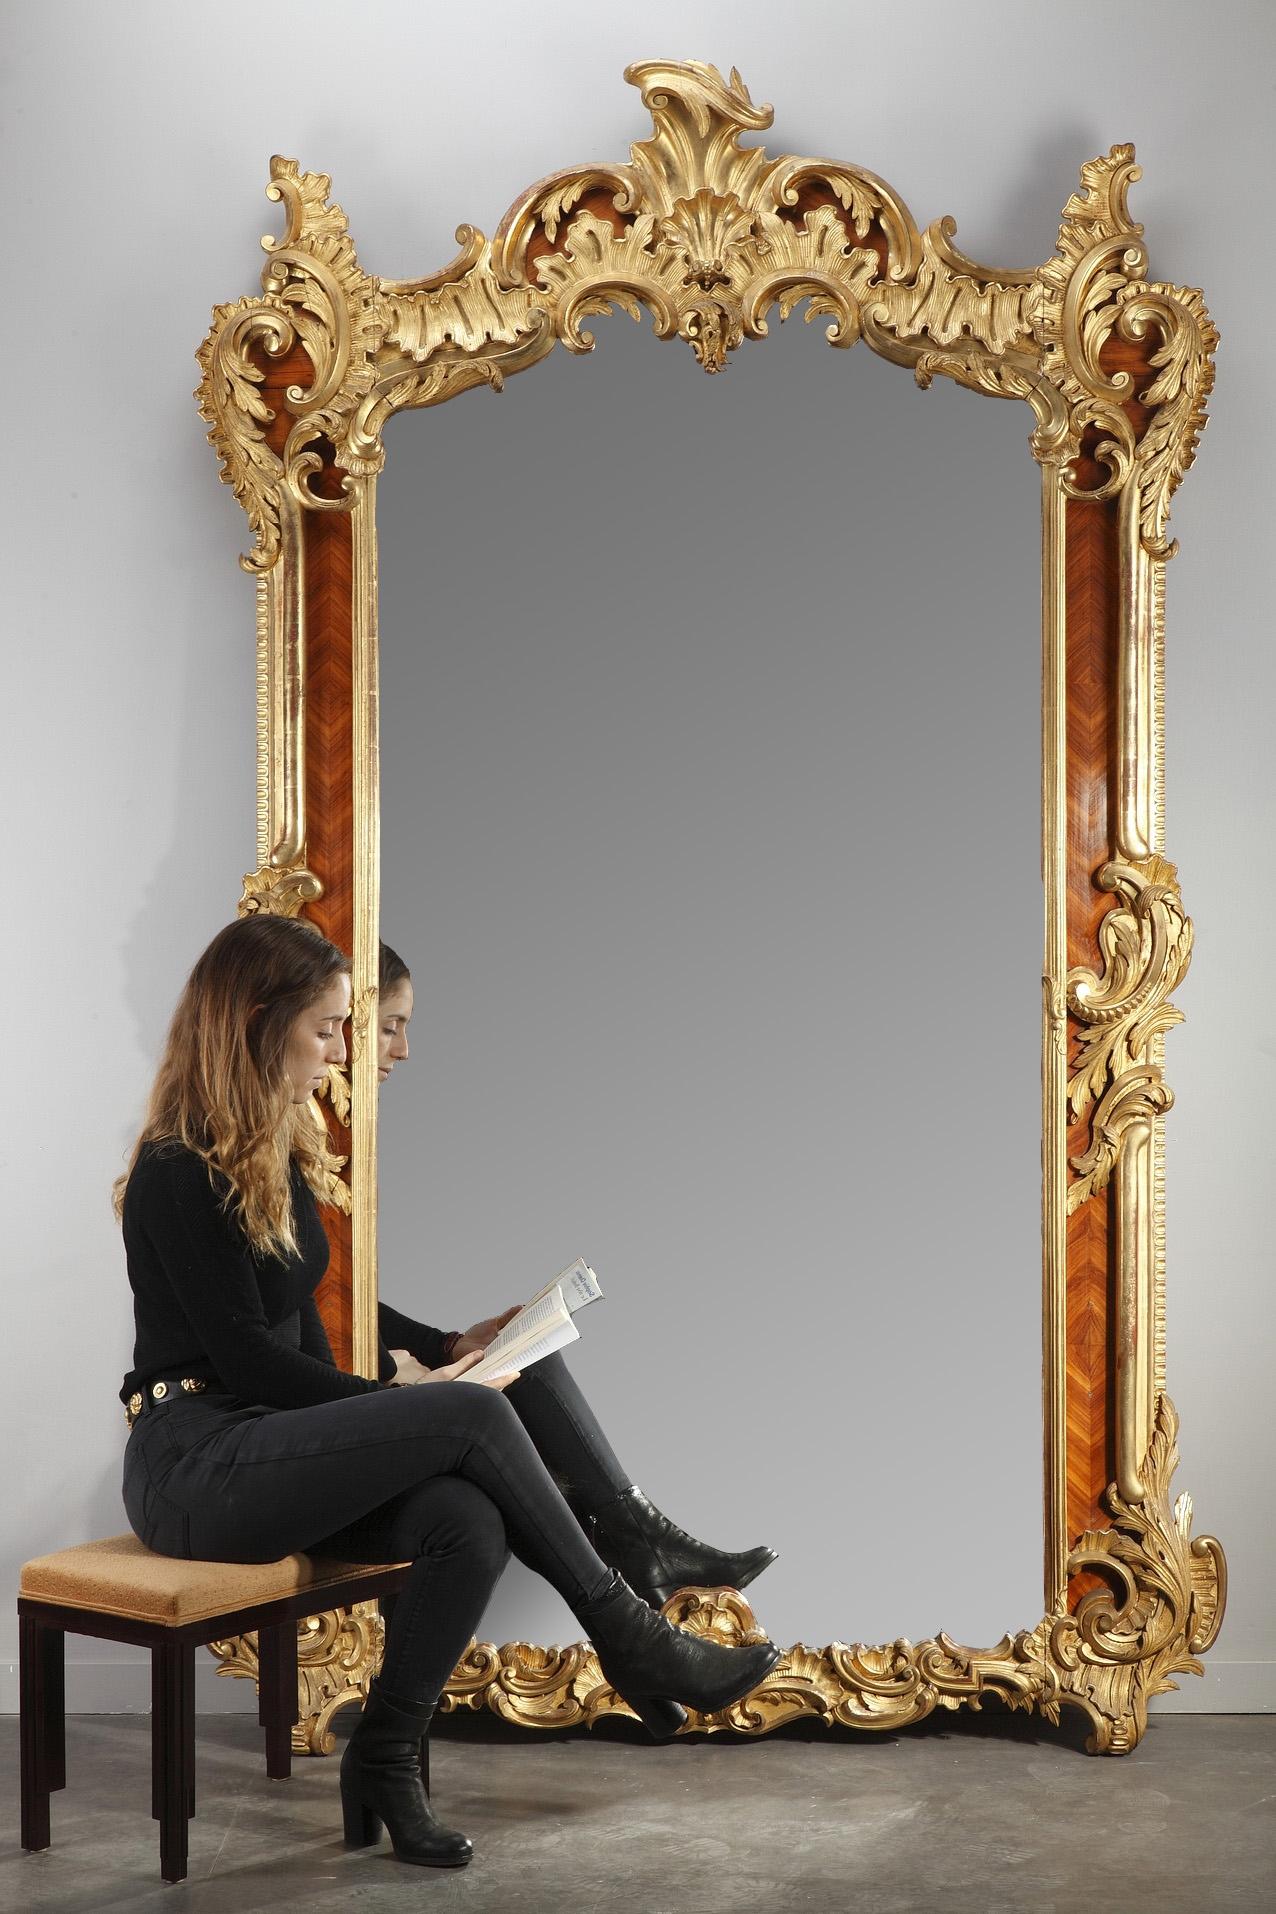 This monumentally-sized Louis XV-style Revival mirror features an undulating, intricately carved giltwood frame on rosewood veneer background. Designed in Rocaille style, the mirror boasts foliate decoration of acanthus leaves, C scrolls and shell